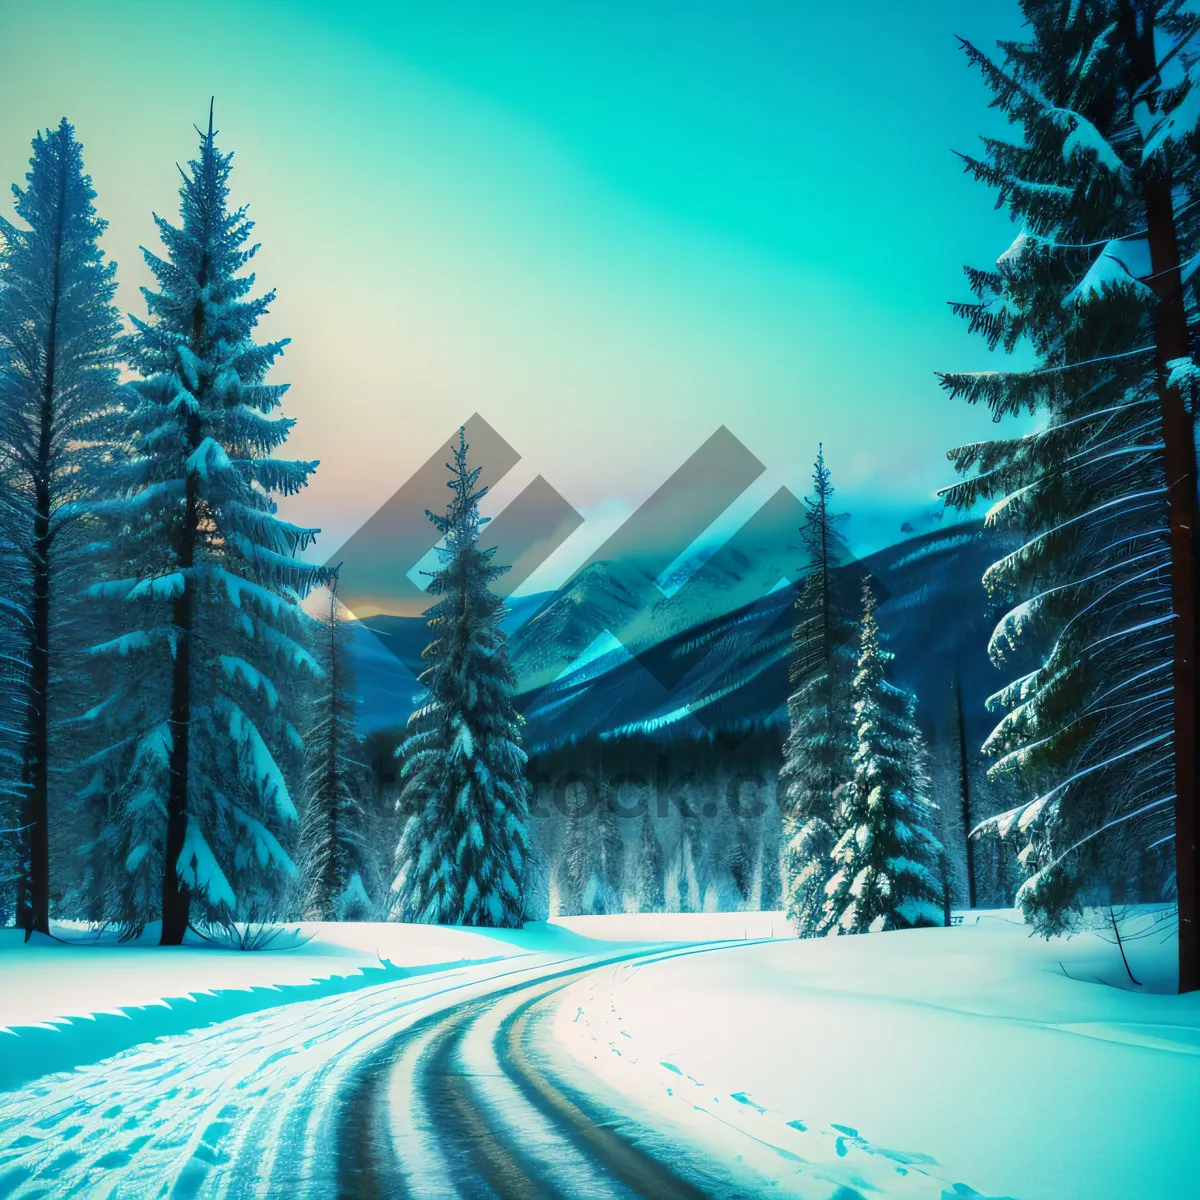 Picture of Winter Wonderland Cityscape with Snow-Covered Fir Trees